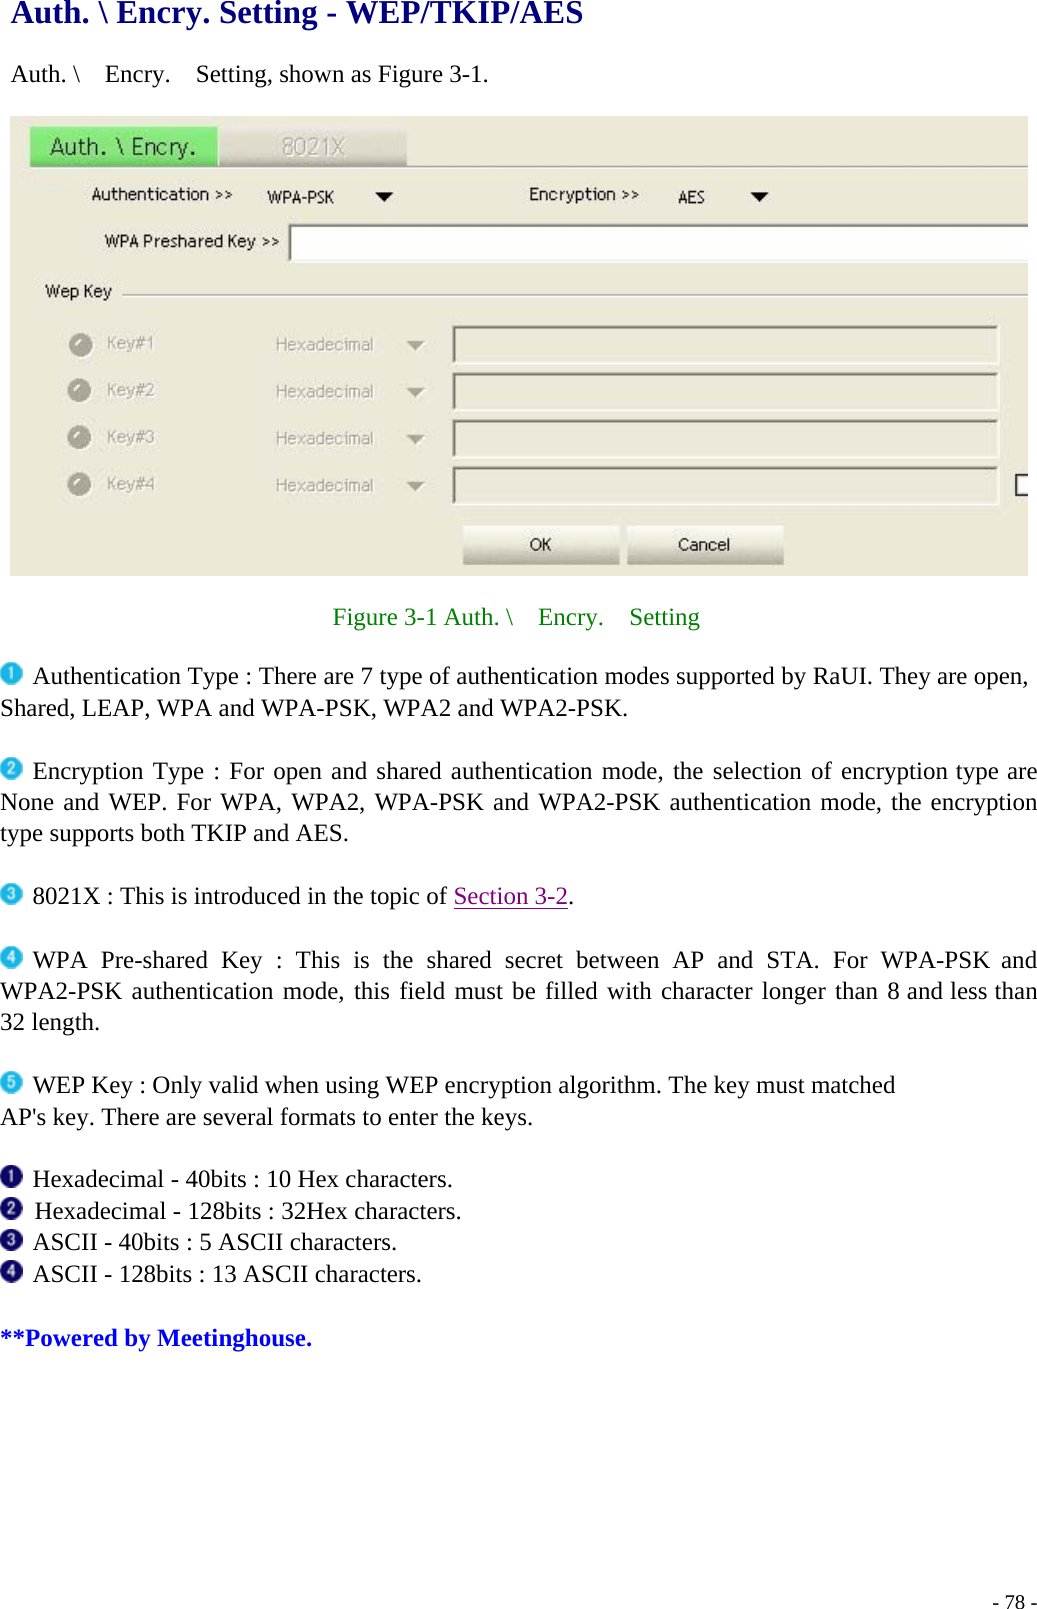 Auth. \ Encry. Setting - WEP/TKIP/AES  Auth. \    Encry.    Setting, shown as Figure 3-1.    Figure 3-1 Auth. \  Encry.  Setting   Authentication Type : There are 7 type of authentication modes supported by RaUI. They are open, Shared, LEAP, WPA and WPA-PSK, WPA2 and WPA2-PSK.   Encryption Type : For open and shared authentication mode, the selection of encryption type are None and WEP. For WPA, WPA2, WPA-PSK and WPA2-PSK authentication mode, the encryption type supports both TKIP and AES.     - 78 - 8021X : This is introduced in the topic of Section 3-2.   WPA Pre-shared Key : This is the shared secret between AP and STA. For WPA-PSK and WPA2-PSK authentication mode, this field must be filled with character longer than 8 and less than 32 length.   WEP Key : Only valid when using WEP encryption algorithm. The key must matched AP&apos;s key. There are several formats to enter the keys.   Hexadecimal - 40bits : 10 Hex characters.   Hexadecimal - 128bits : 32Hex characters.  ASCII - 40bits : 5 ASCII characters.  ASCII - 128bits : 13 ASCII characters.  **Powered by Meetinghouse. 